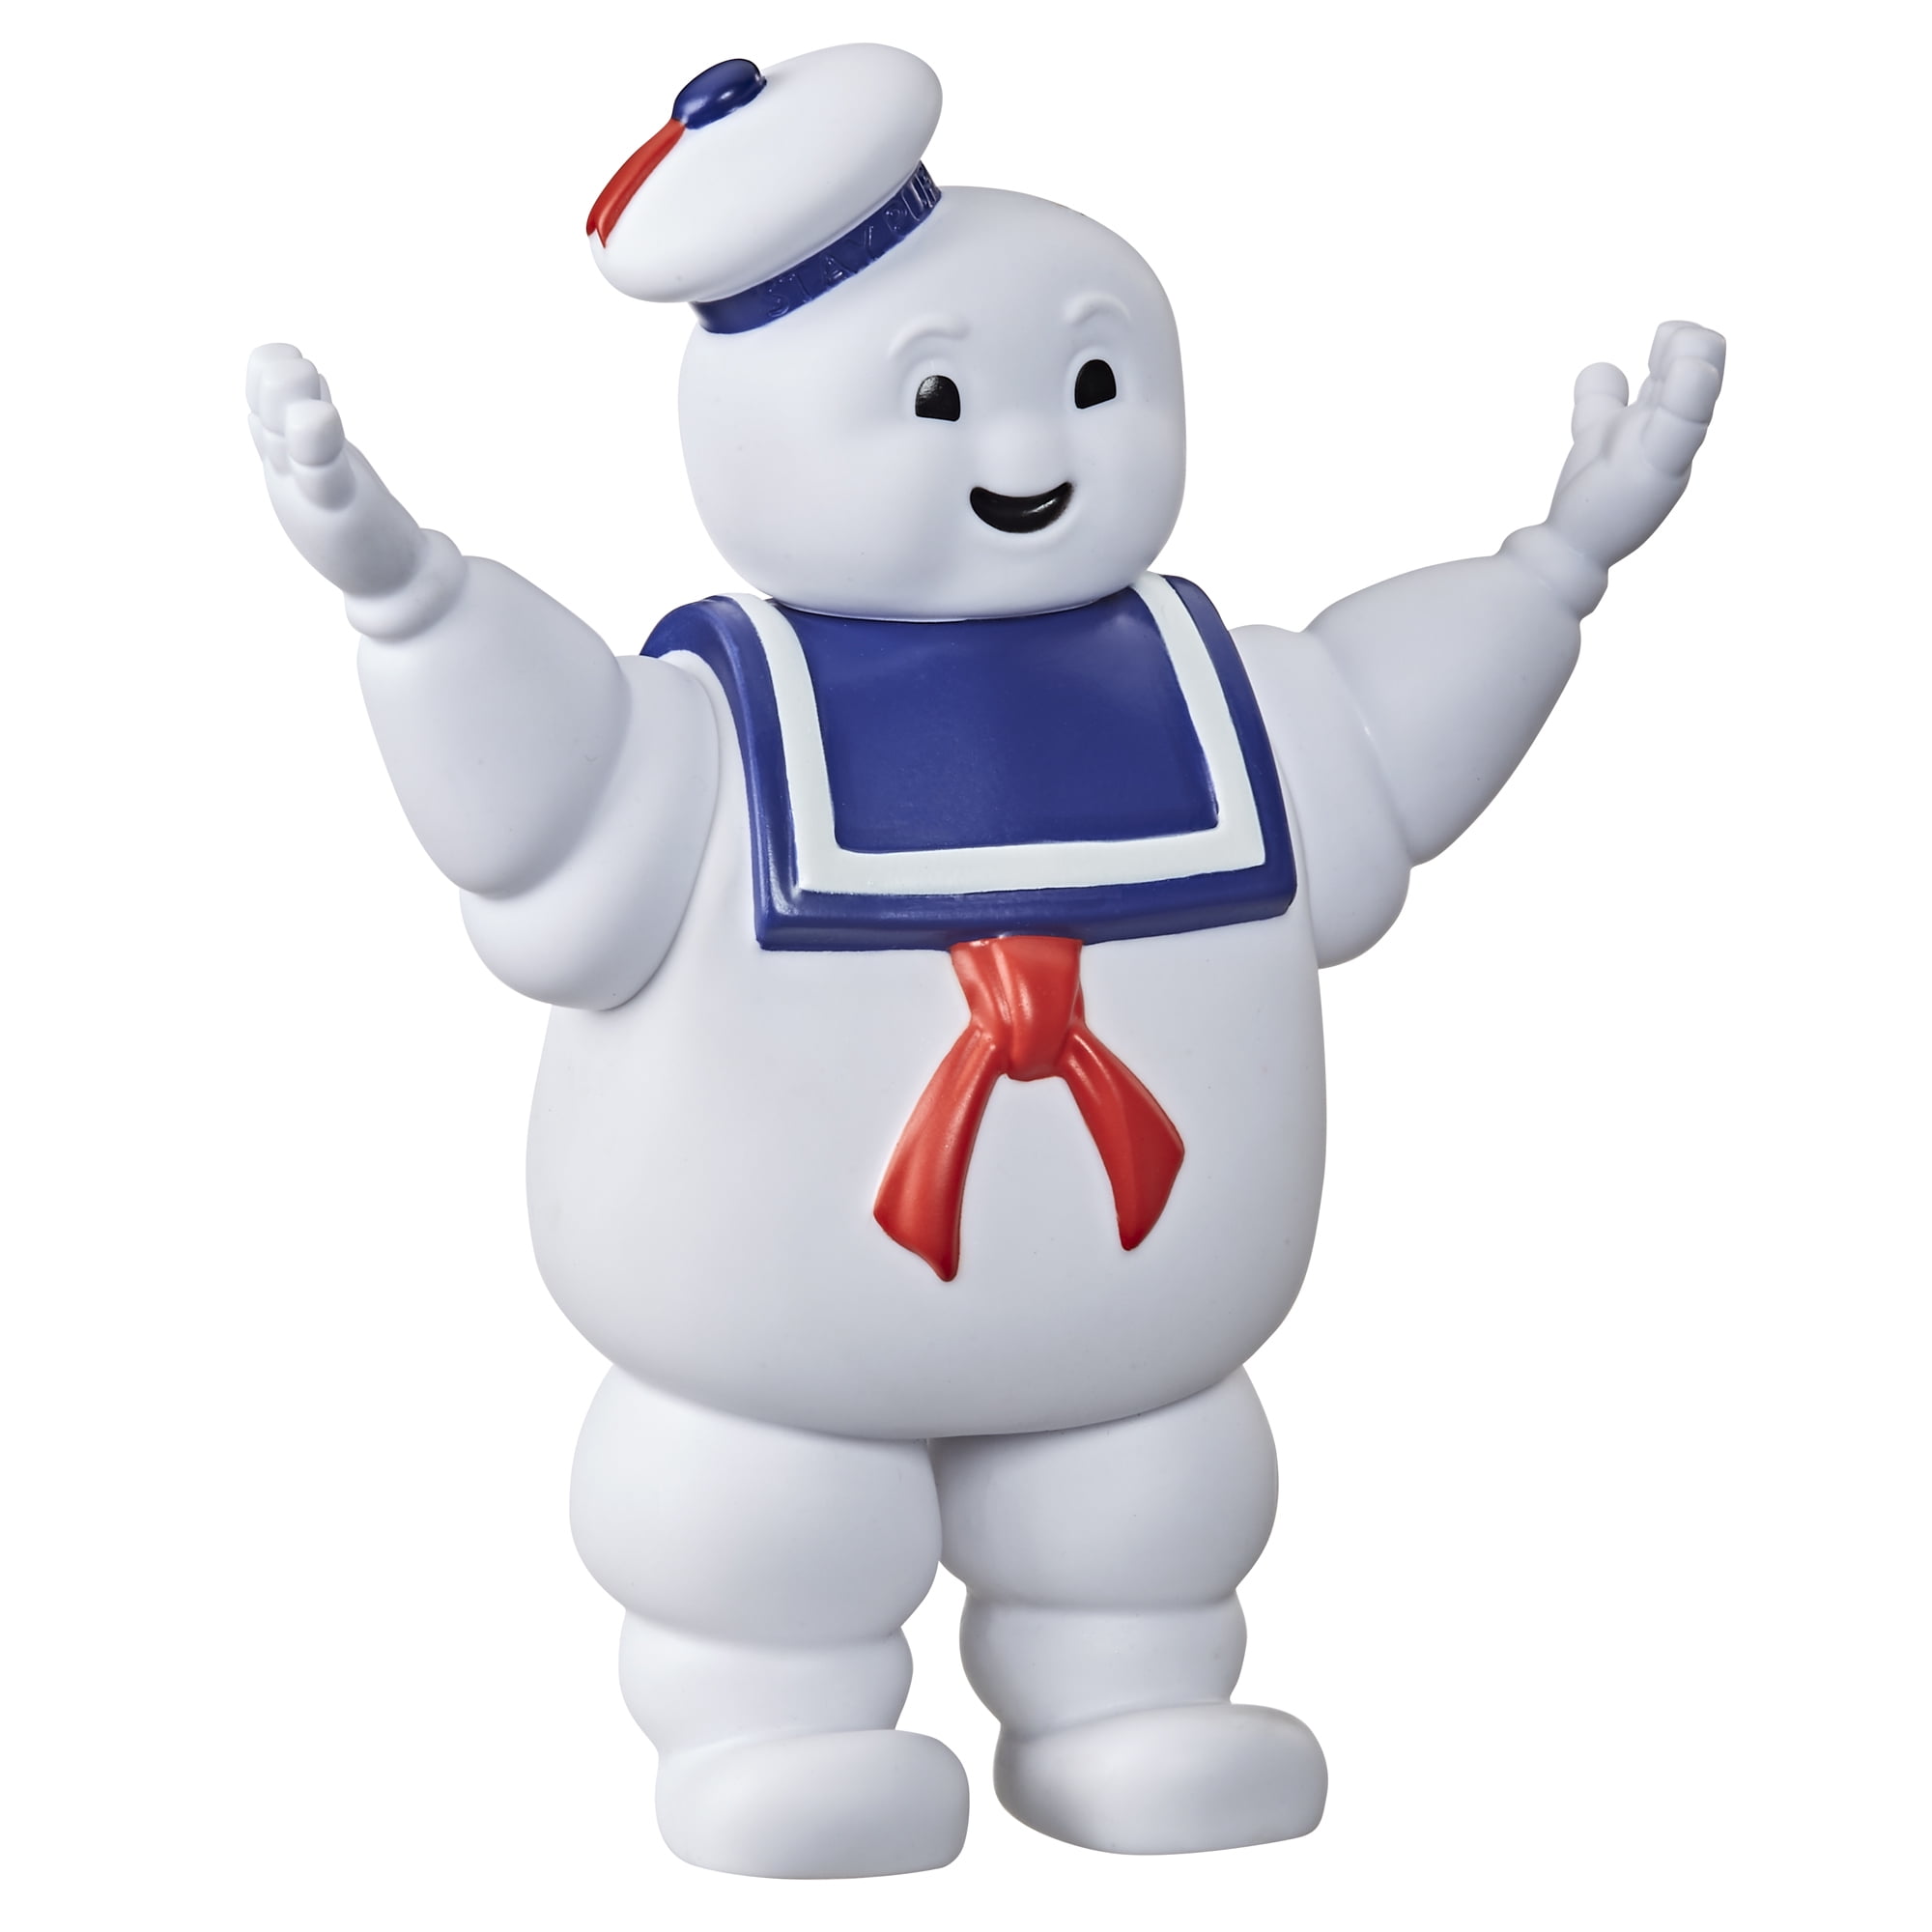 Ghostbusters Kenner Classics Stay-Puft Marshmallow Man - Walmart.com Ghostbusters Toy